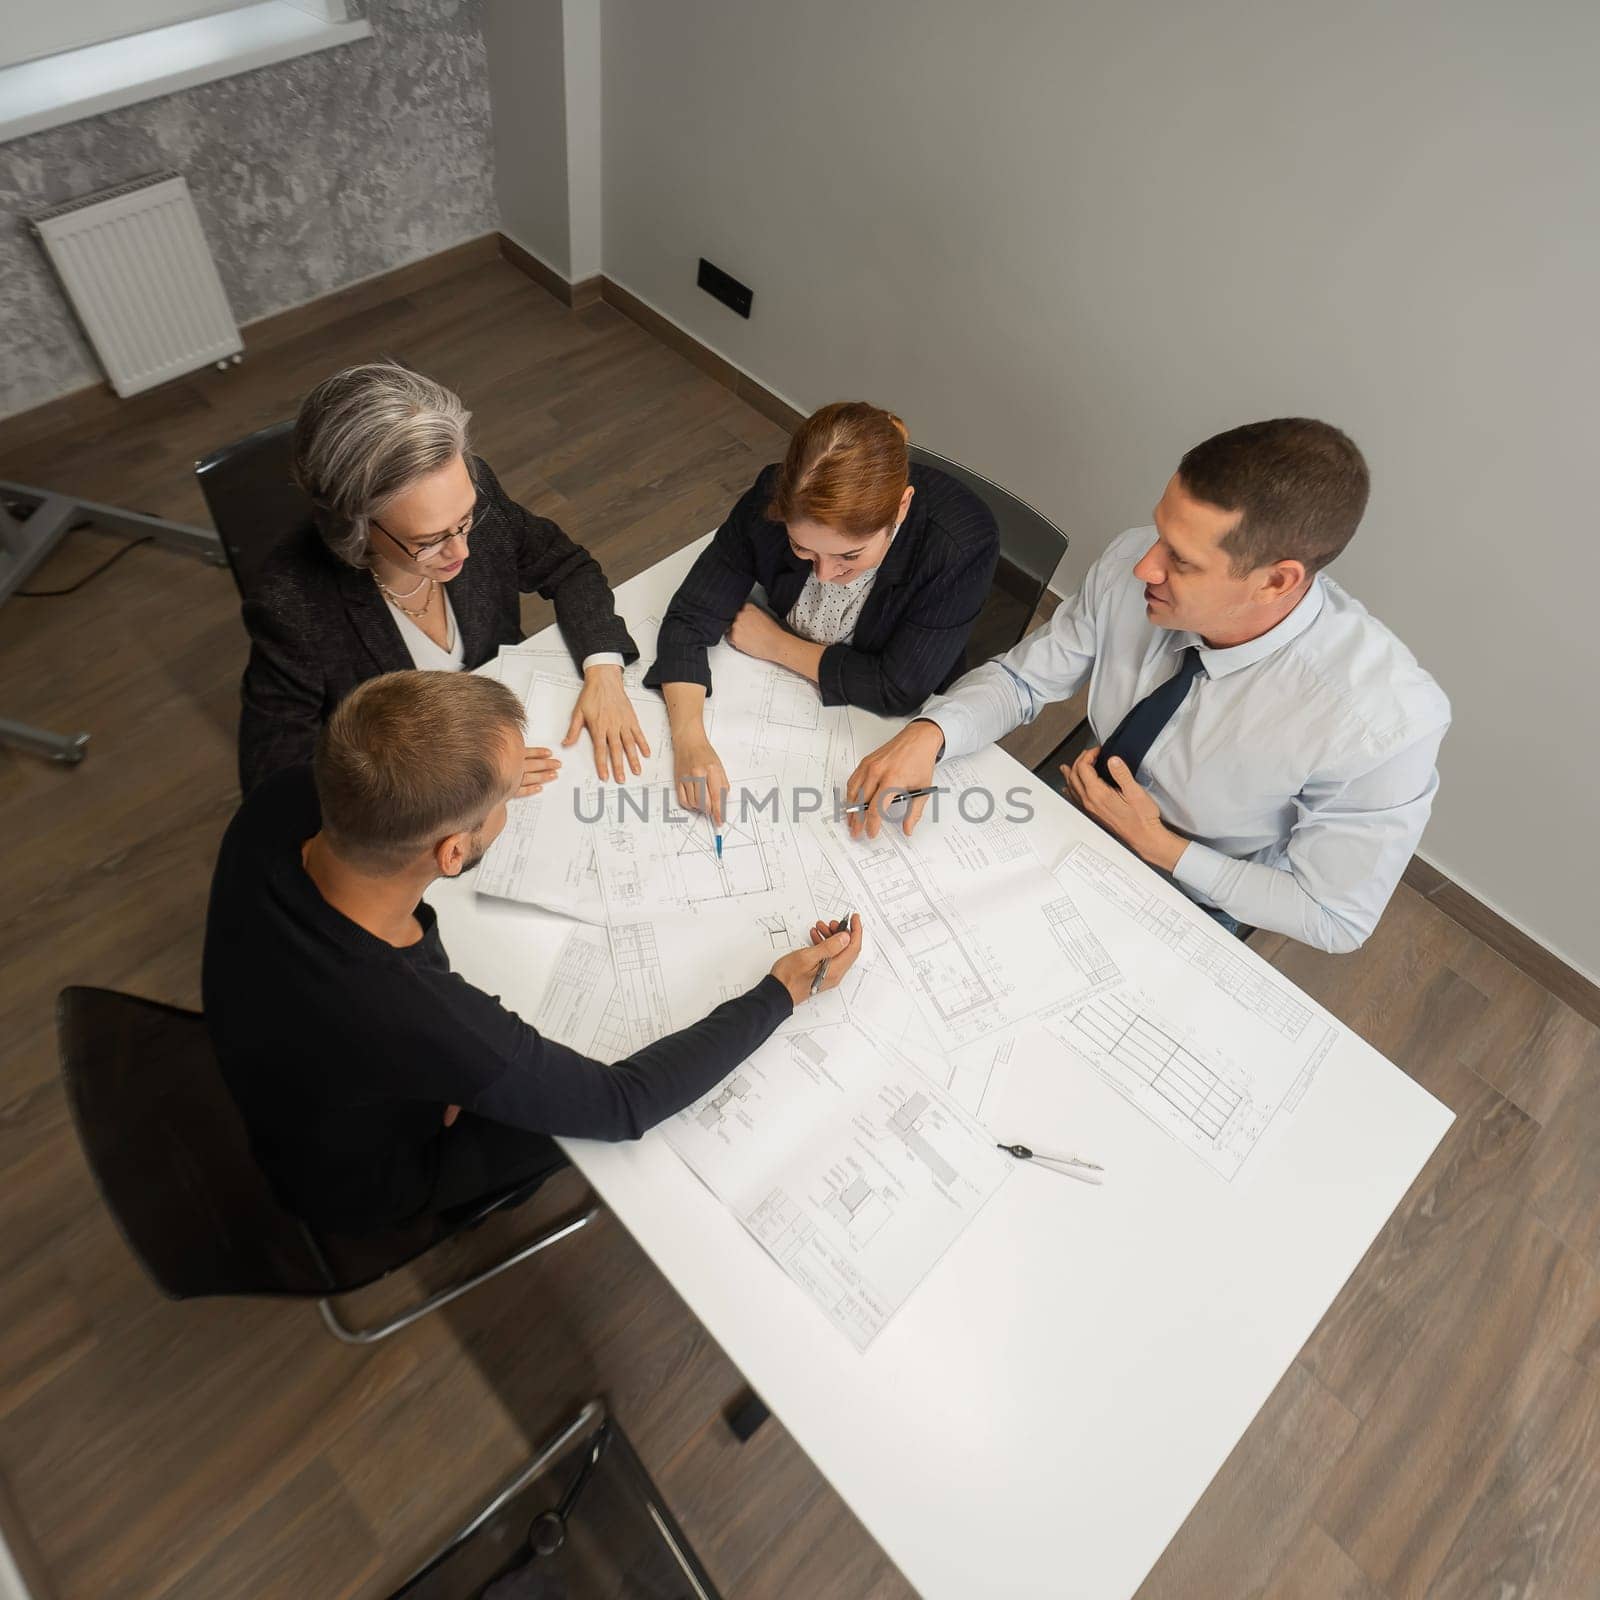 Top view of 4 business people sitting at a table and discussing blueprints. Designers engineers at a meeting. by mrwed54